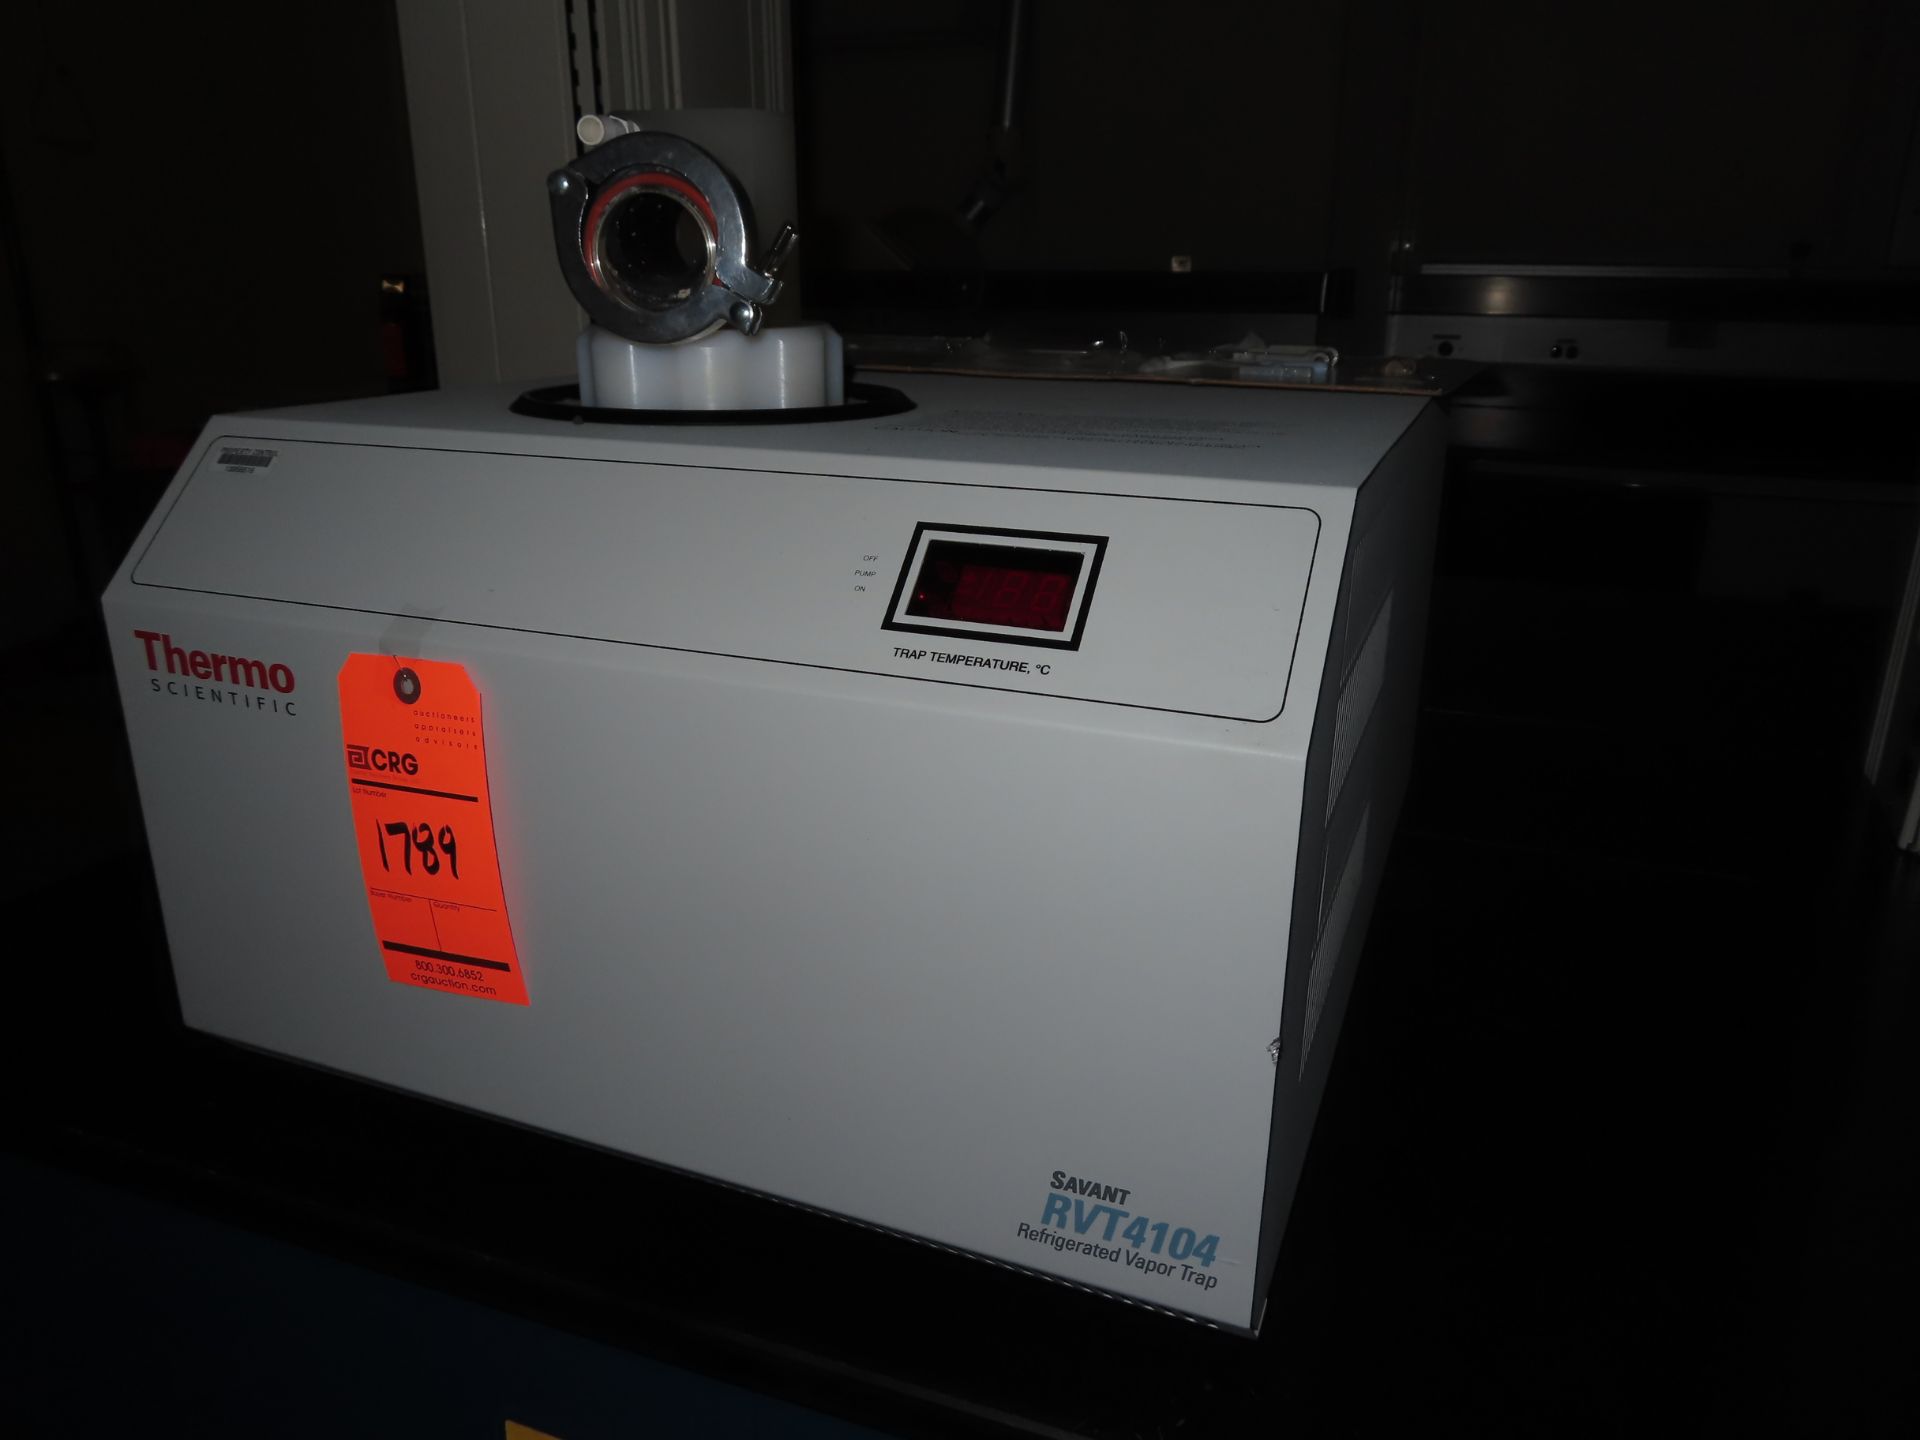 Thermo savant RVT4104 refrigerated vapor trap, located in B wing, 4th floor, room 442A